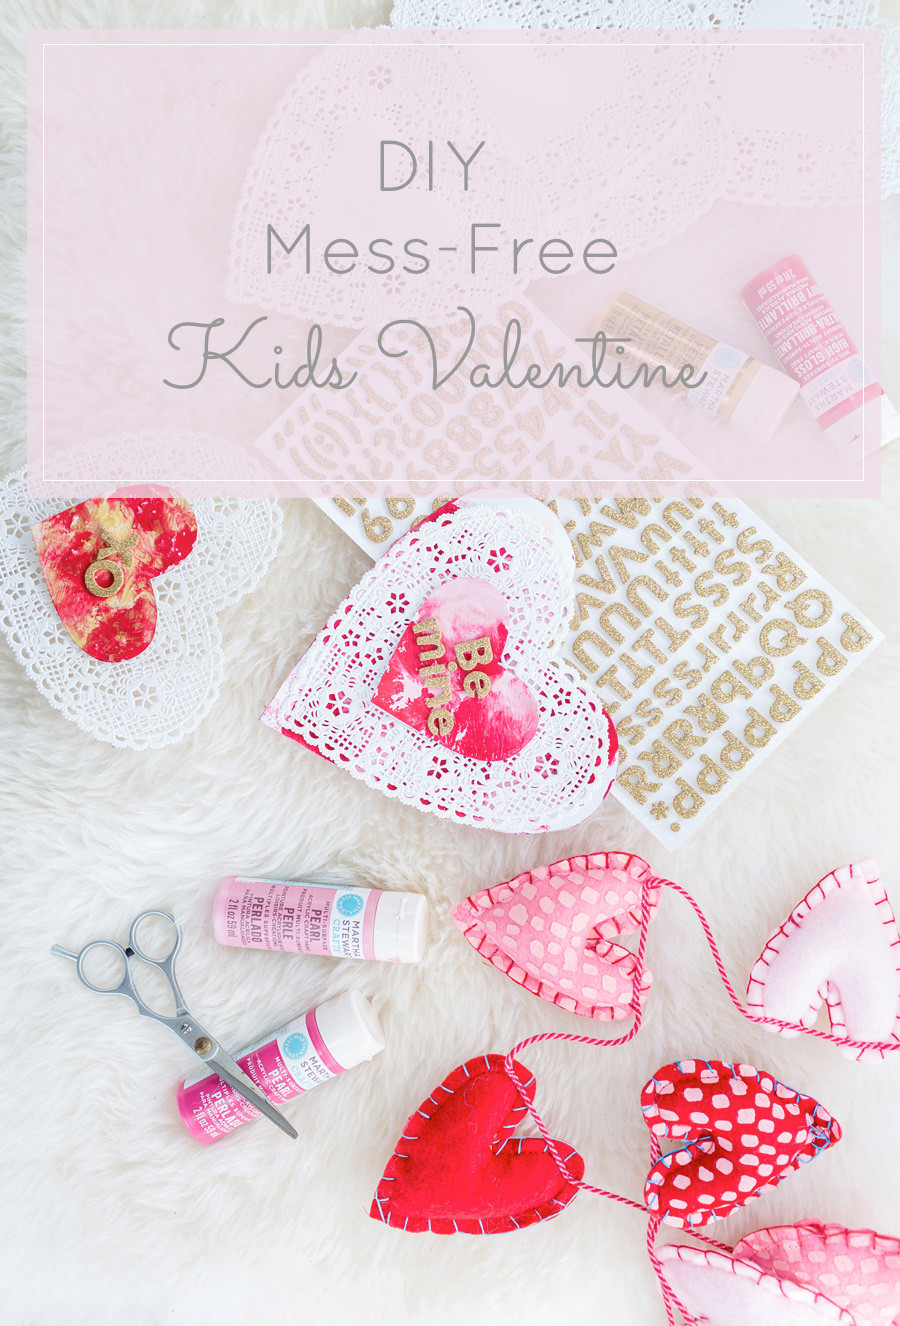 Toddler Valentines Day Crafts
 Toddler Friendly and Mess Free DIY Painted Valentine s